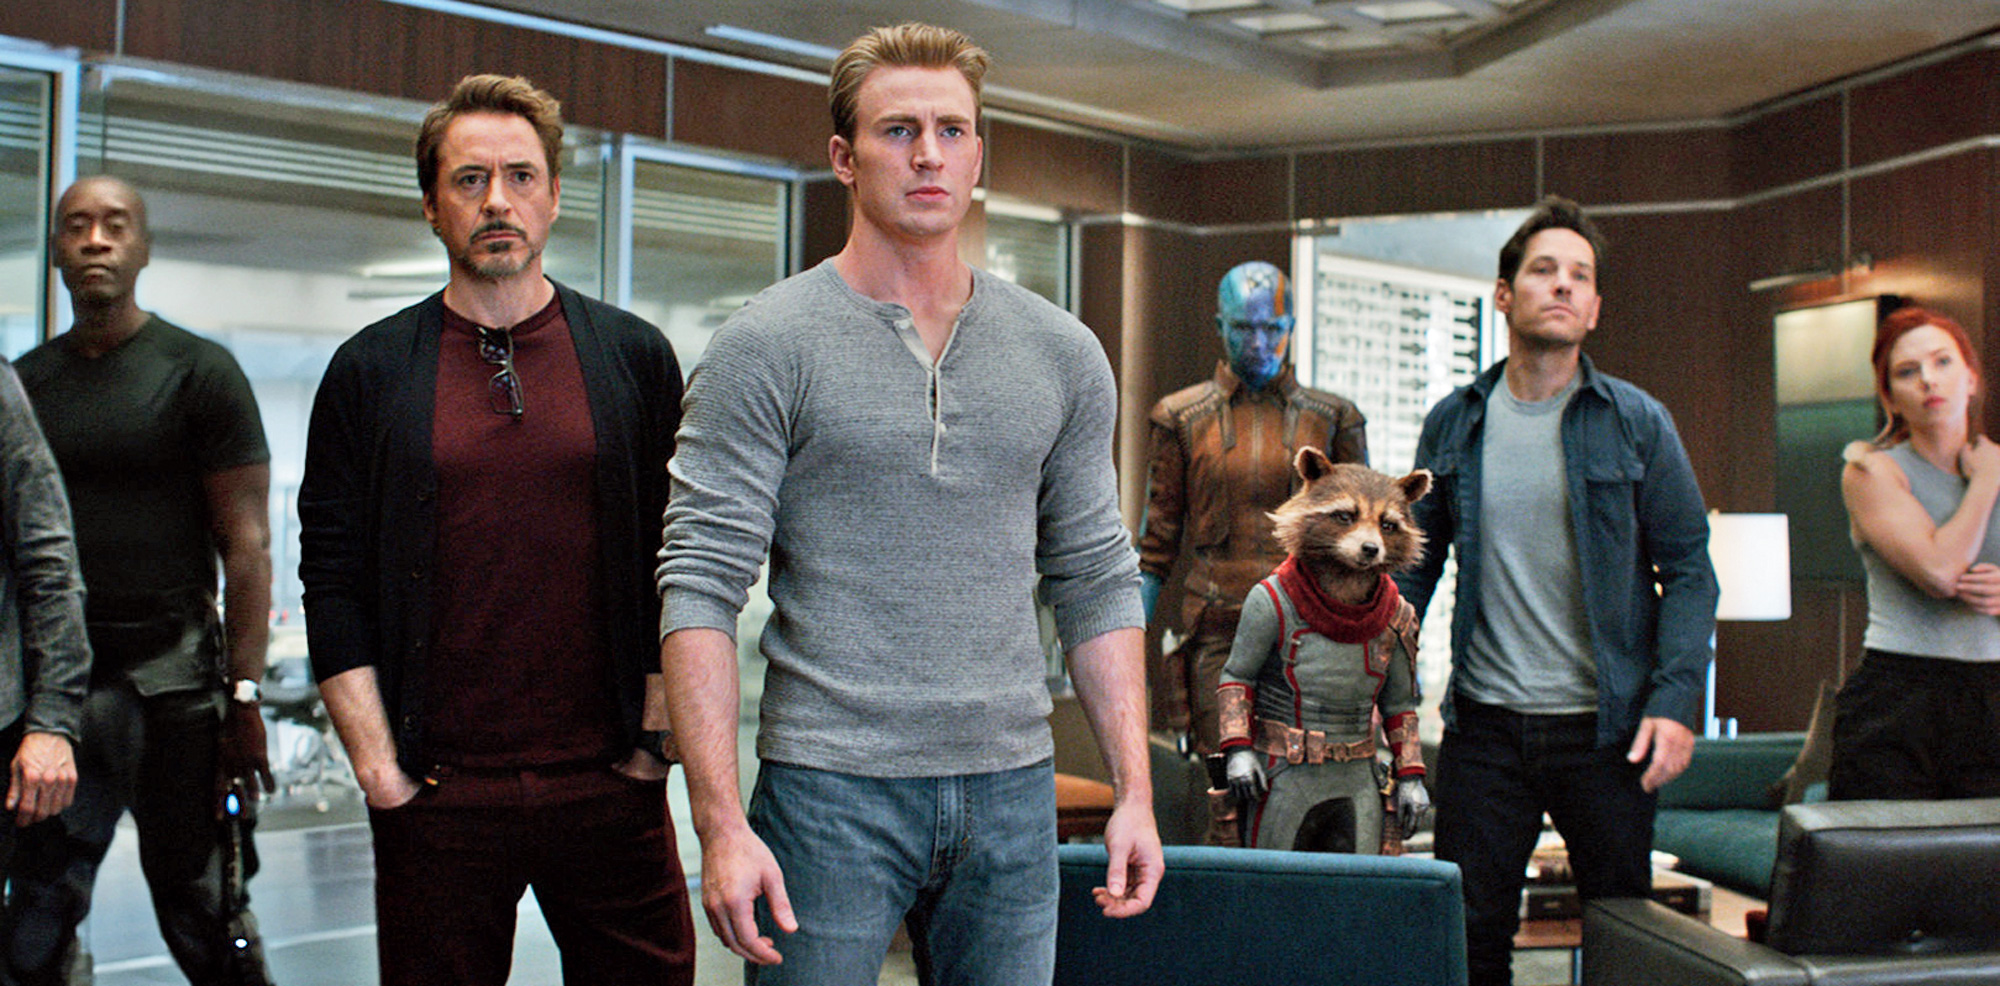 13 moments from Avengers: Endgame that bowled us over and how!